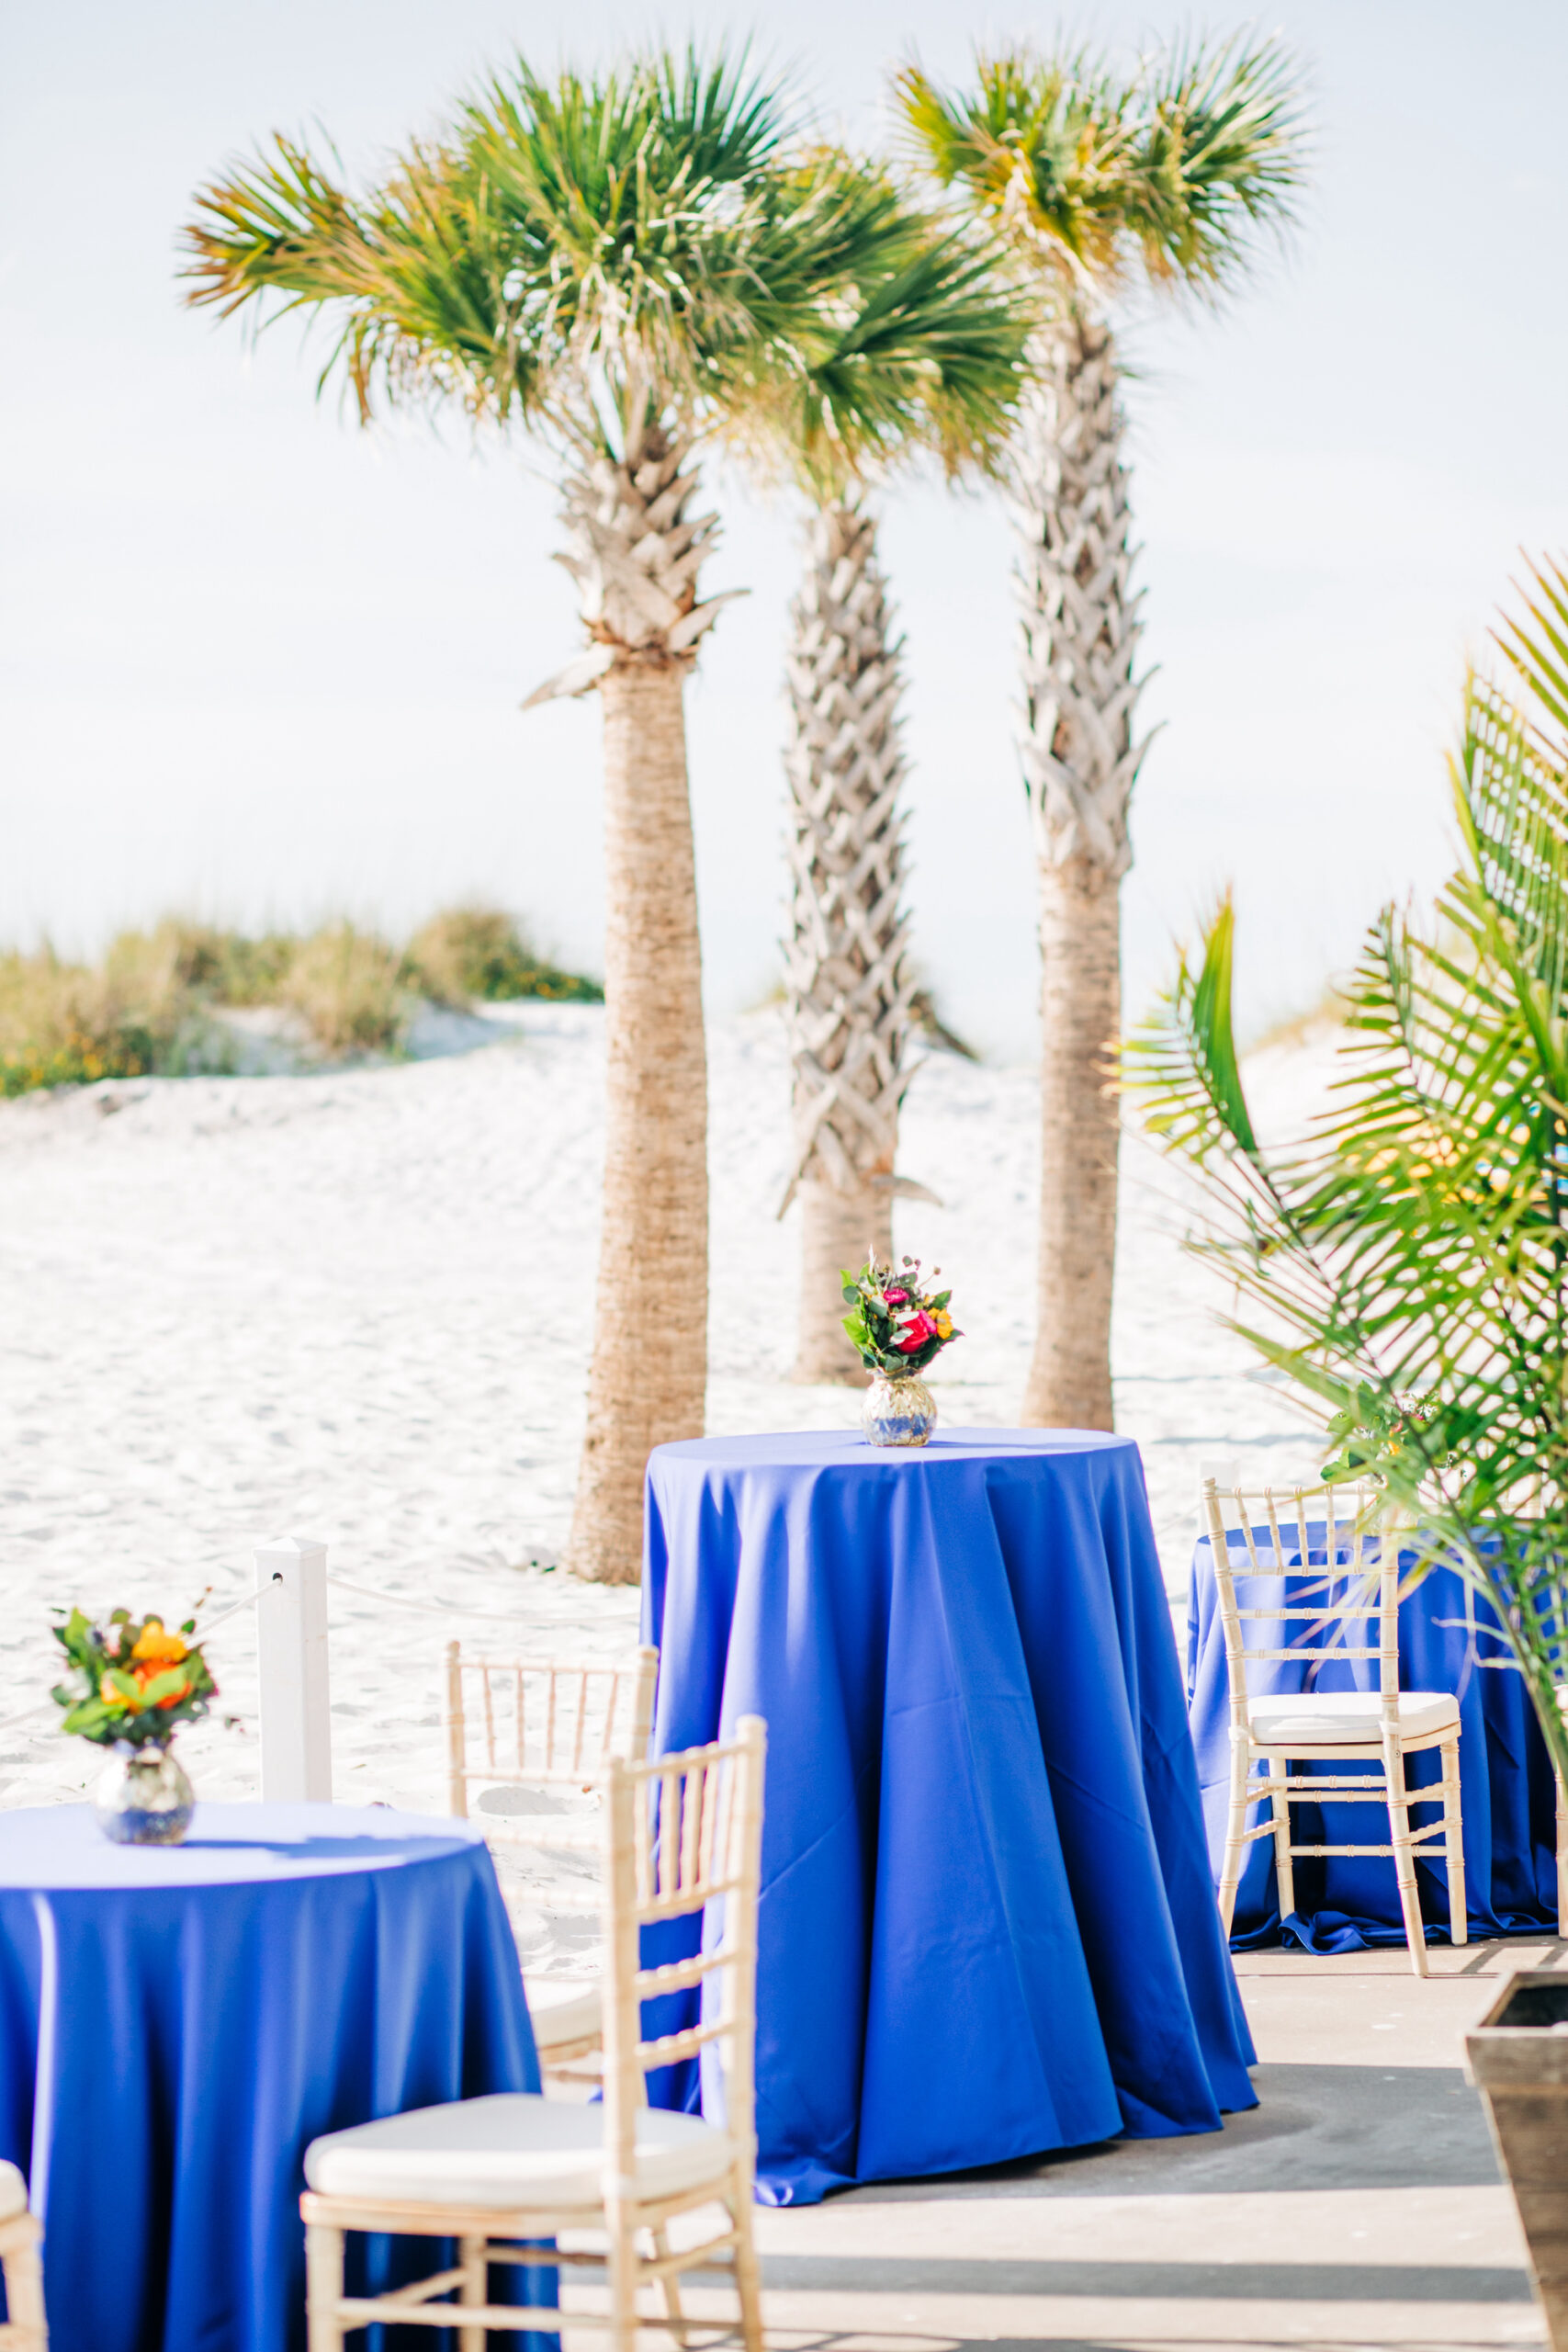 Vibrant Colorful Wedding Ceremony Decor, Blue Table Linens, Small Floral Centerpieces on the Beach, Gold Chiavari Chairs | Tampa Bay Wedding Rentals A Chair Affair | Kate Ryan Event Rentals | Wedding Venue Hilton Clearwater Beach